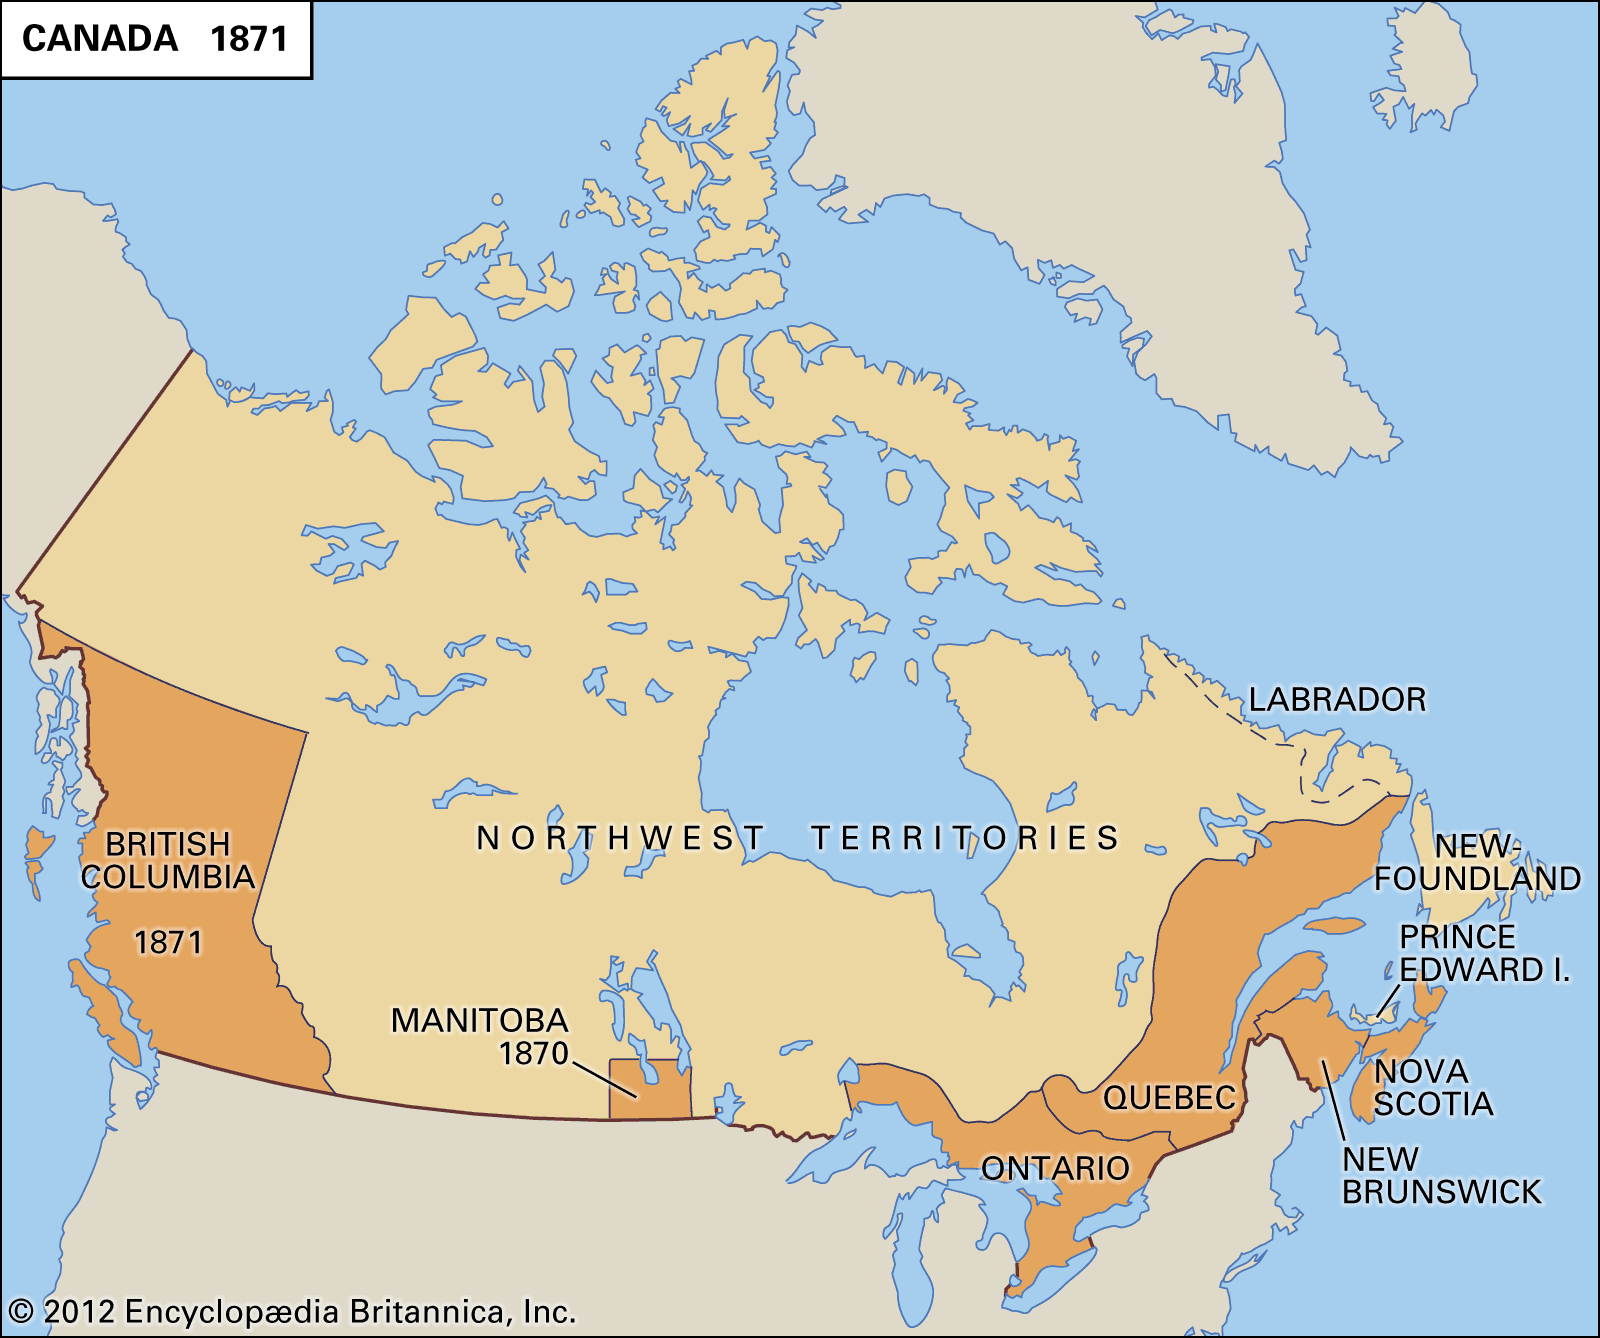 This map of Canada in 1871 shows Canada covering the same area it does today. The only named provinces are Nova Scotia, Prince Edward Island, New Brunswick, Quebec, Ontario, Manitoba, and British Columbia. While British Columbia came into Confederation fully-sized, Manitoba, Ontario, and Quebec were much smaller than they are today. There was nothing in between Manitoba and Ontario, or between Manitoba and British Columbia, but "Northwest Territories", which was for the most part wilderness.